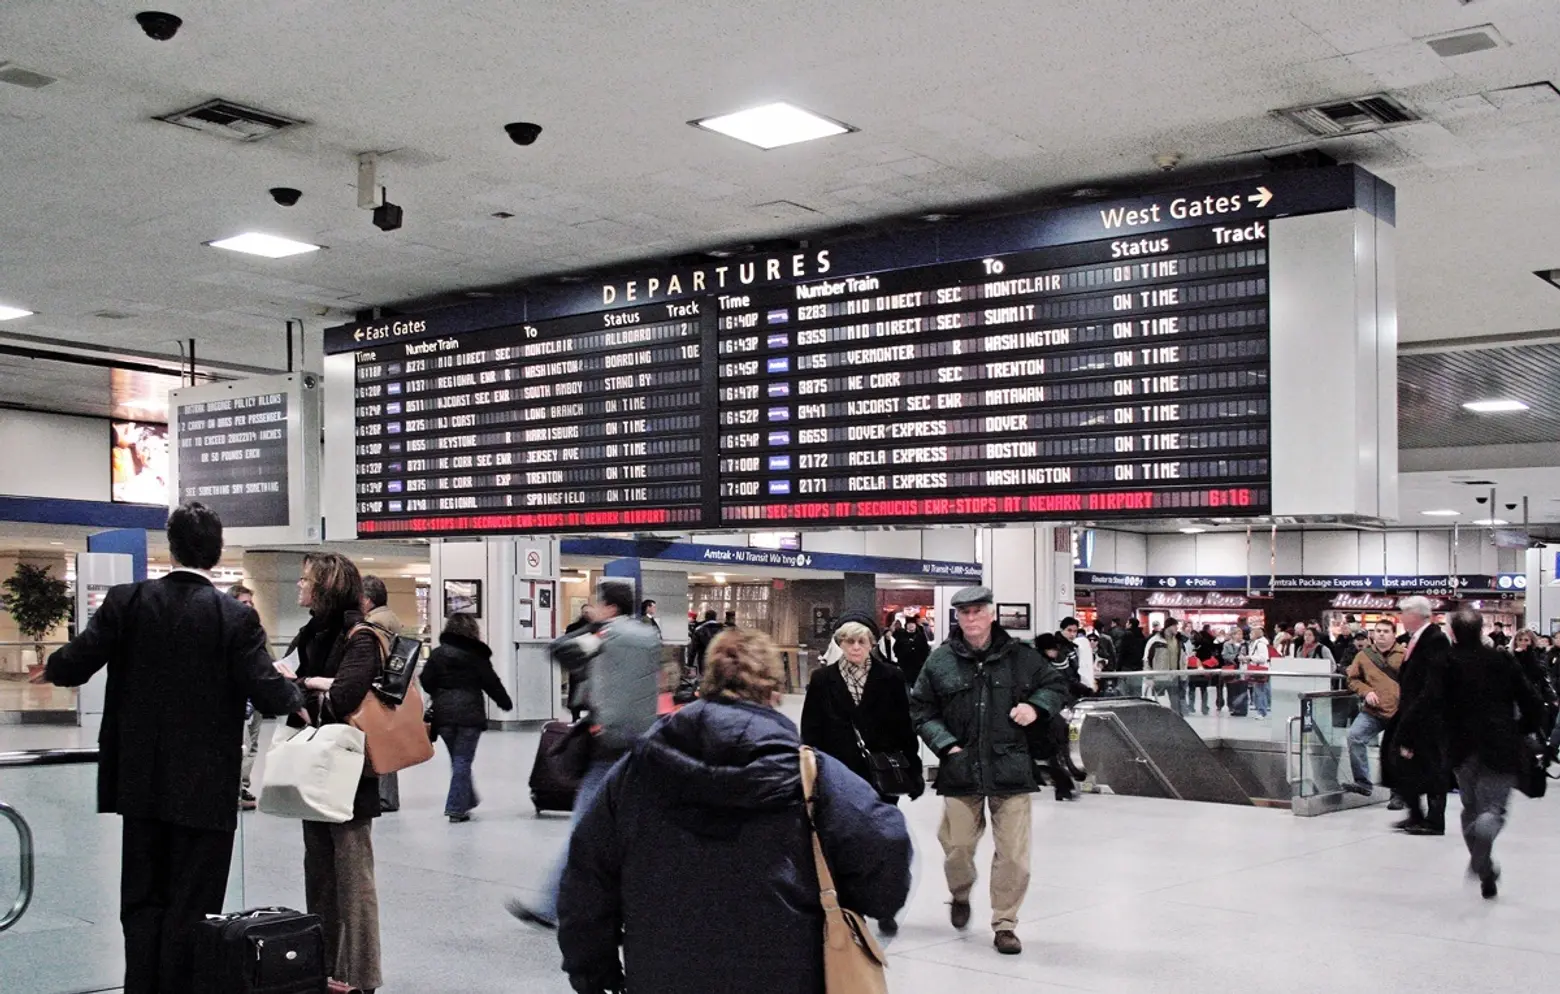 NJ Transit offers discounted fares as it cancels some service to and from Penn Station